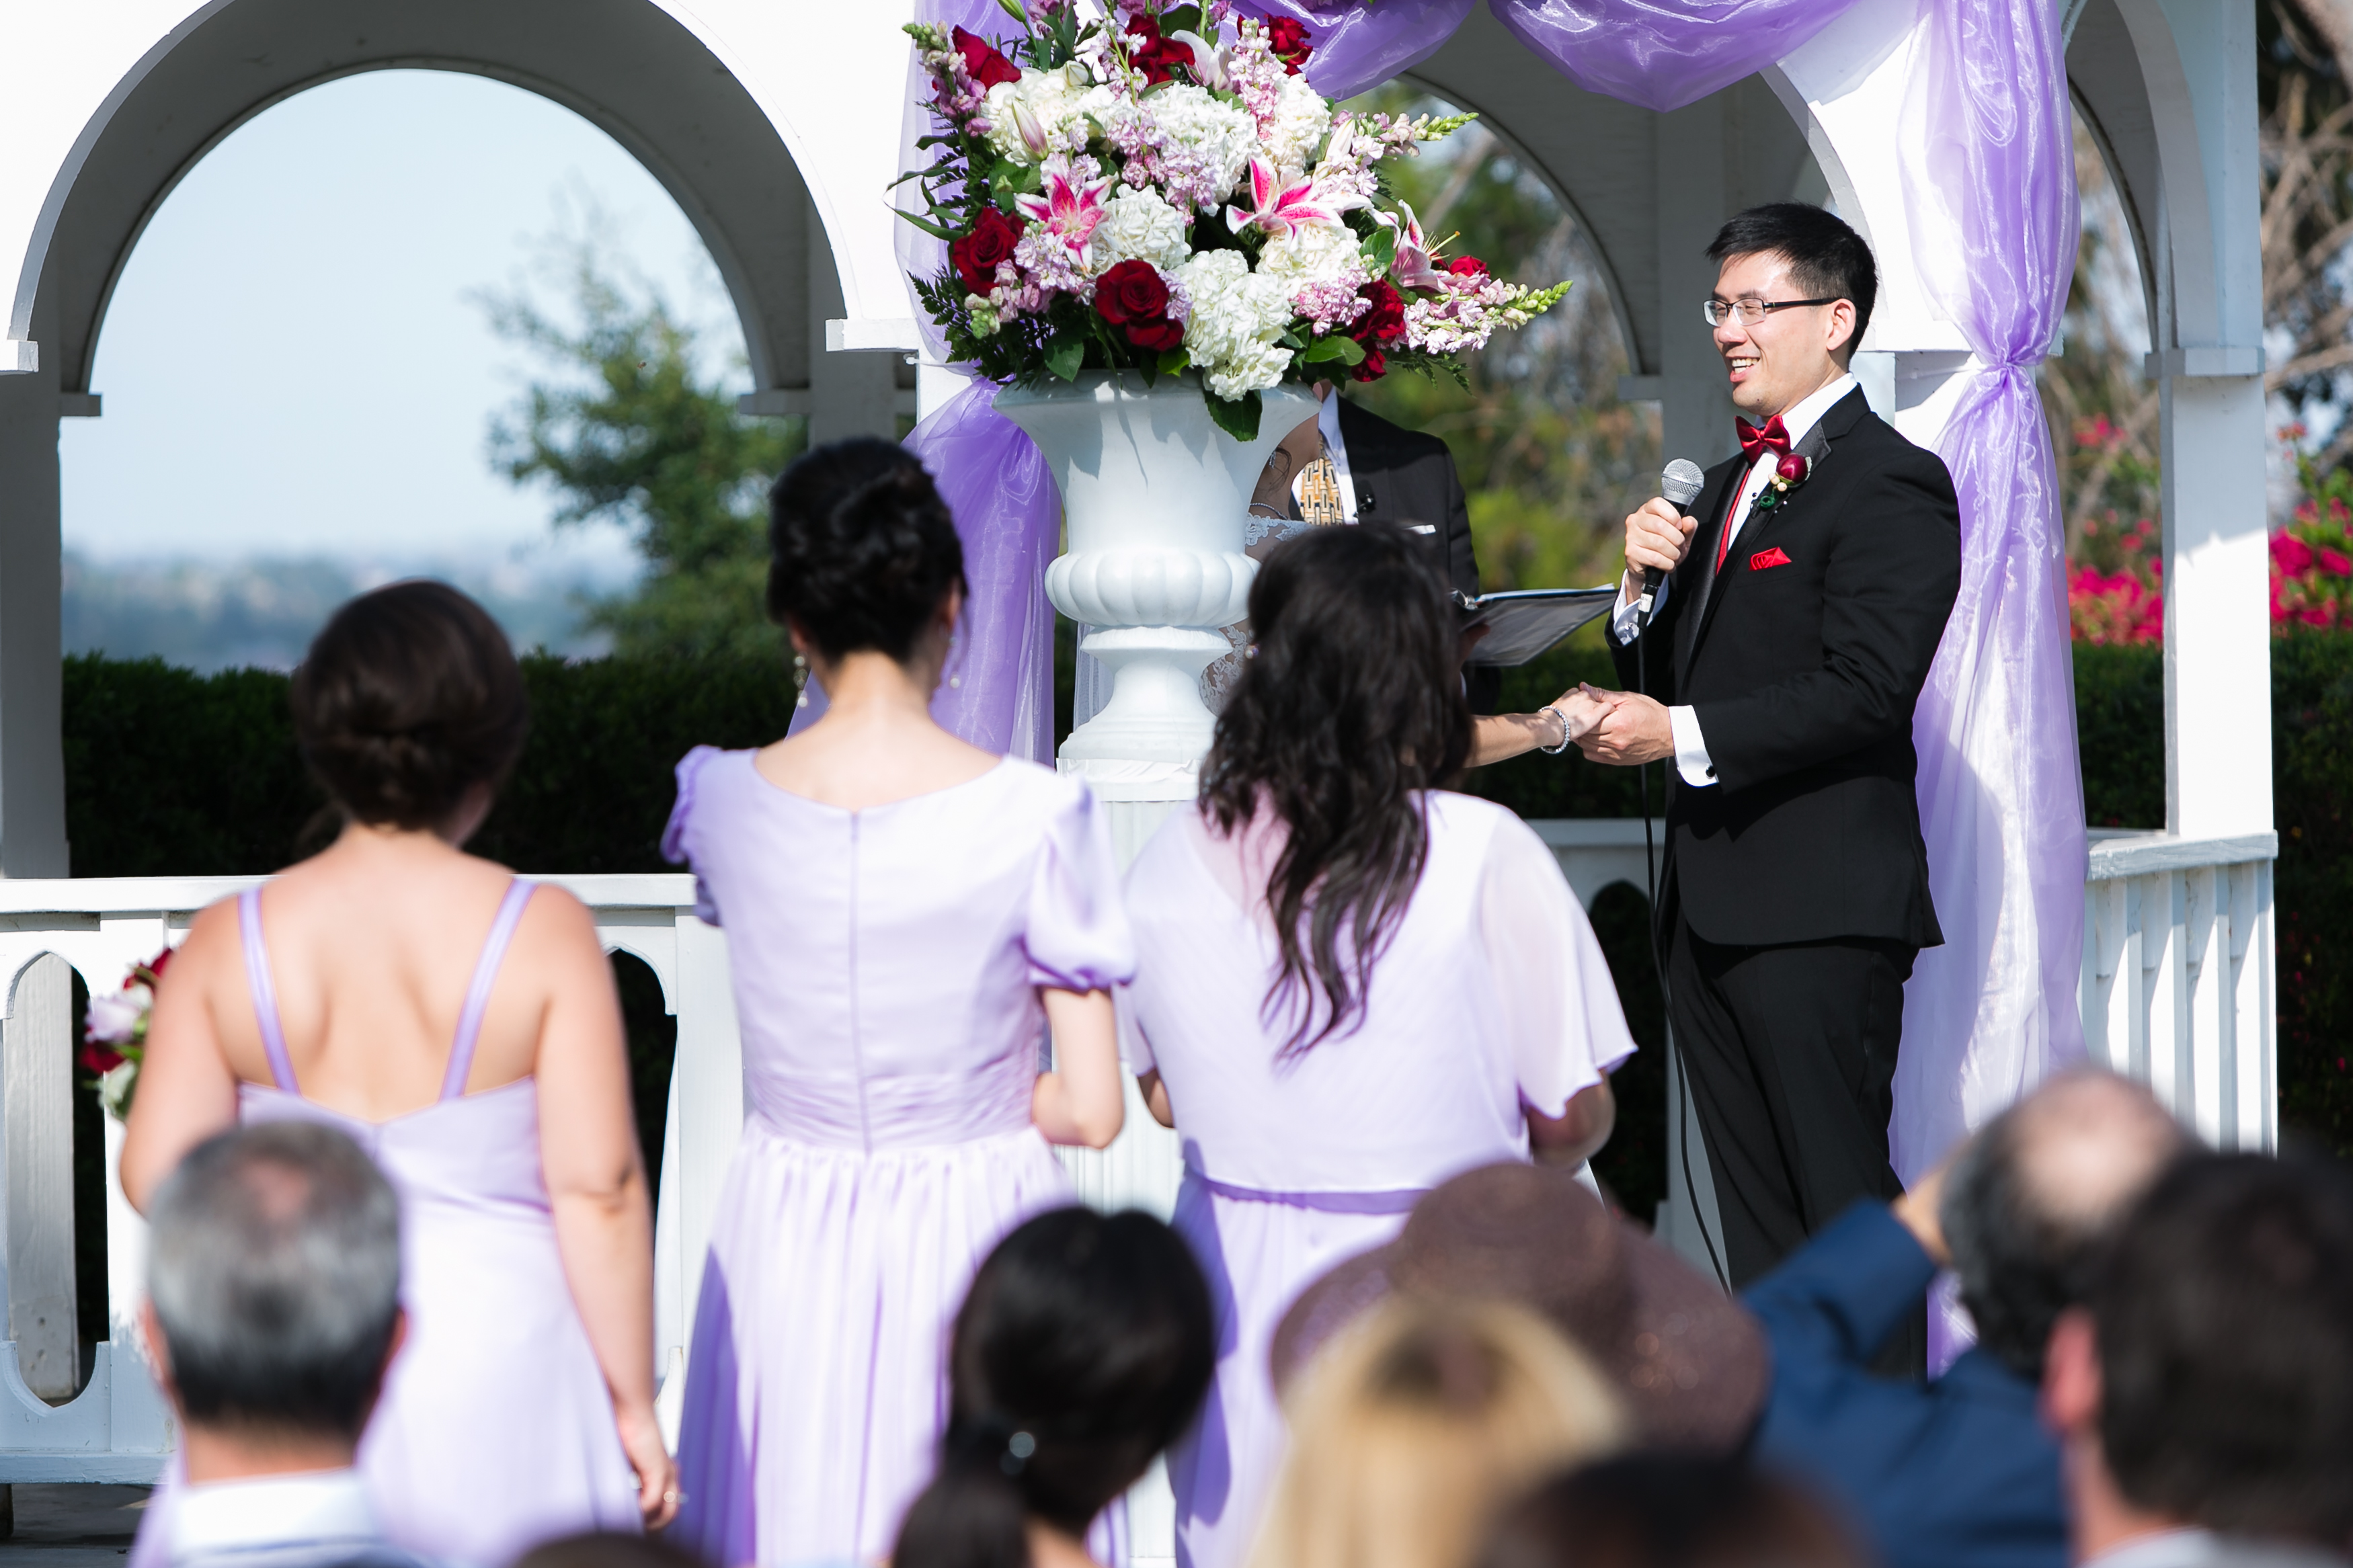 Groom laughing at bride during wedding ceremony in gazebo